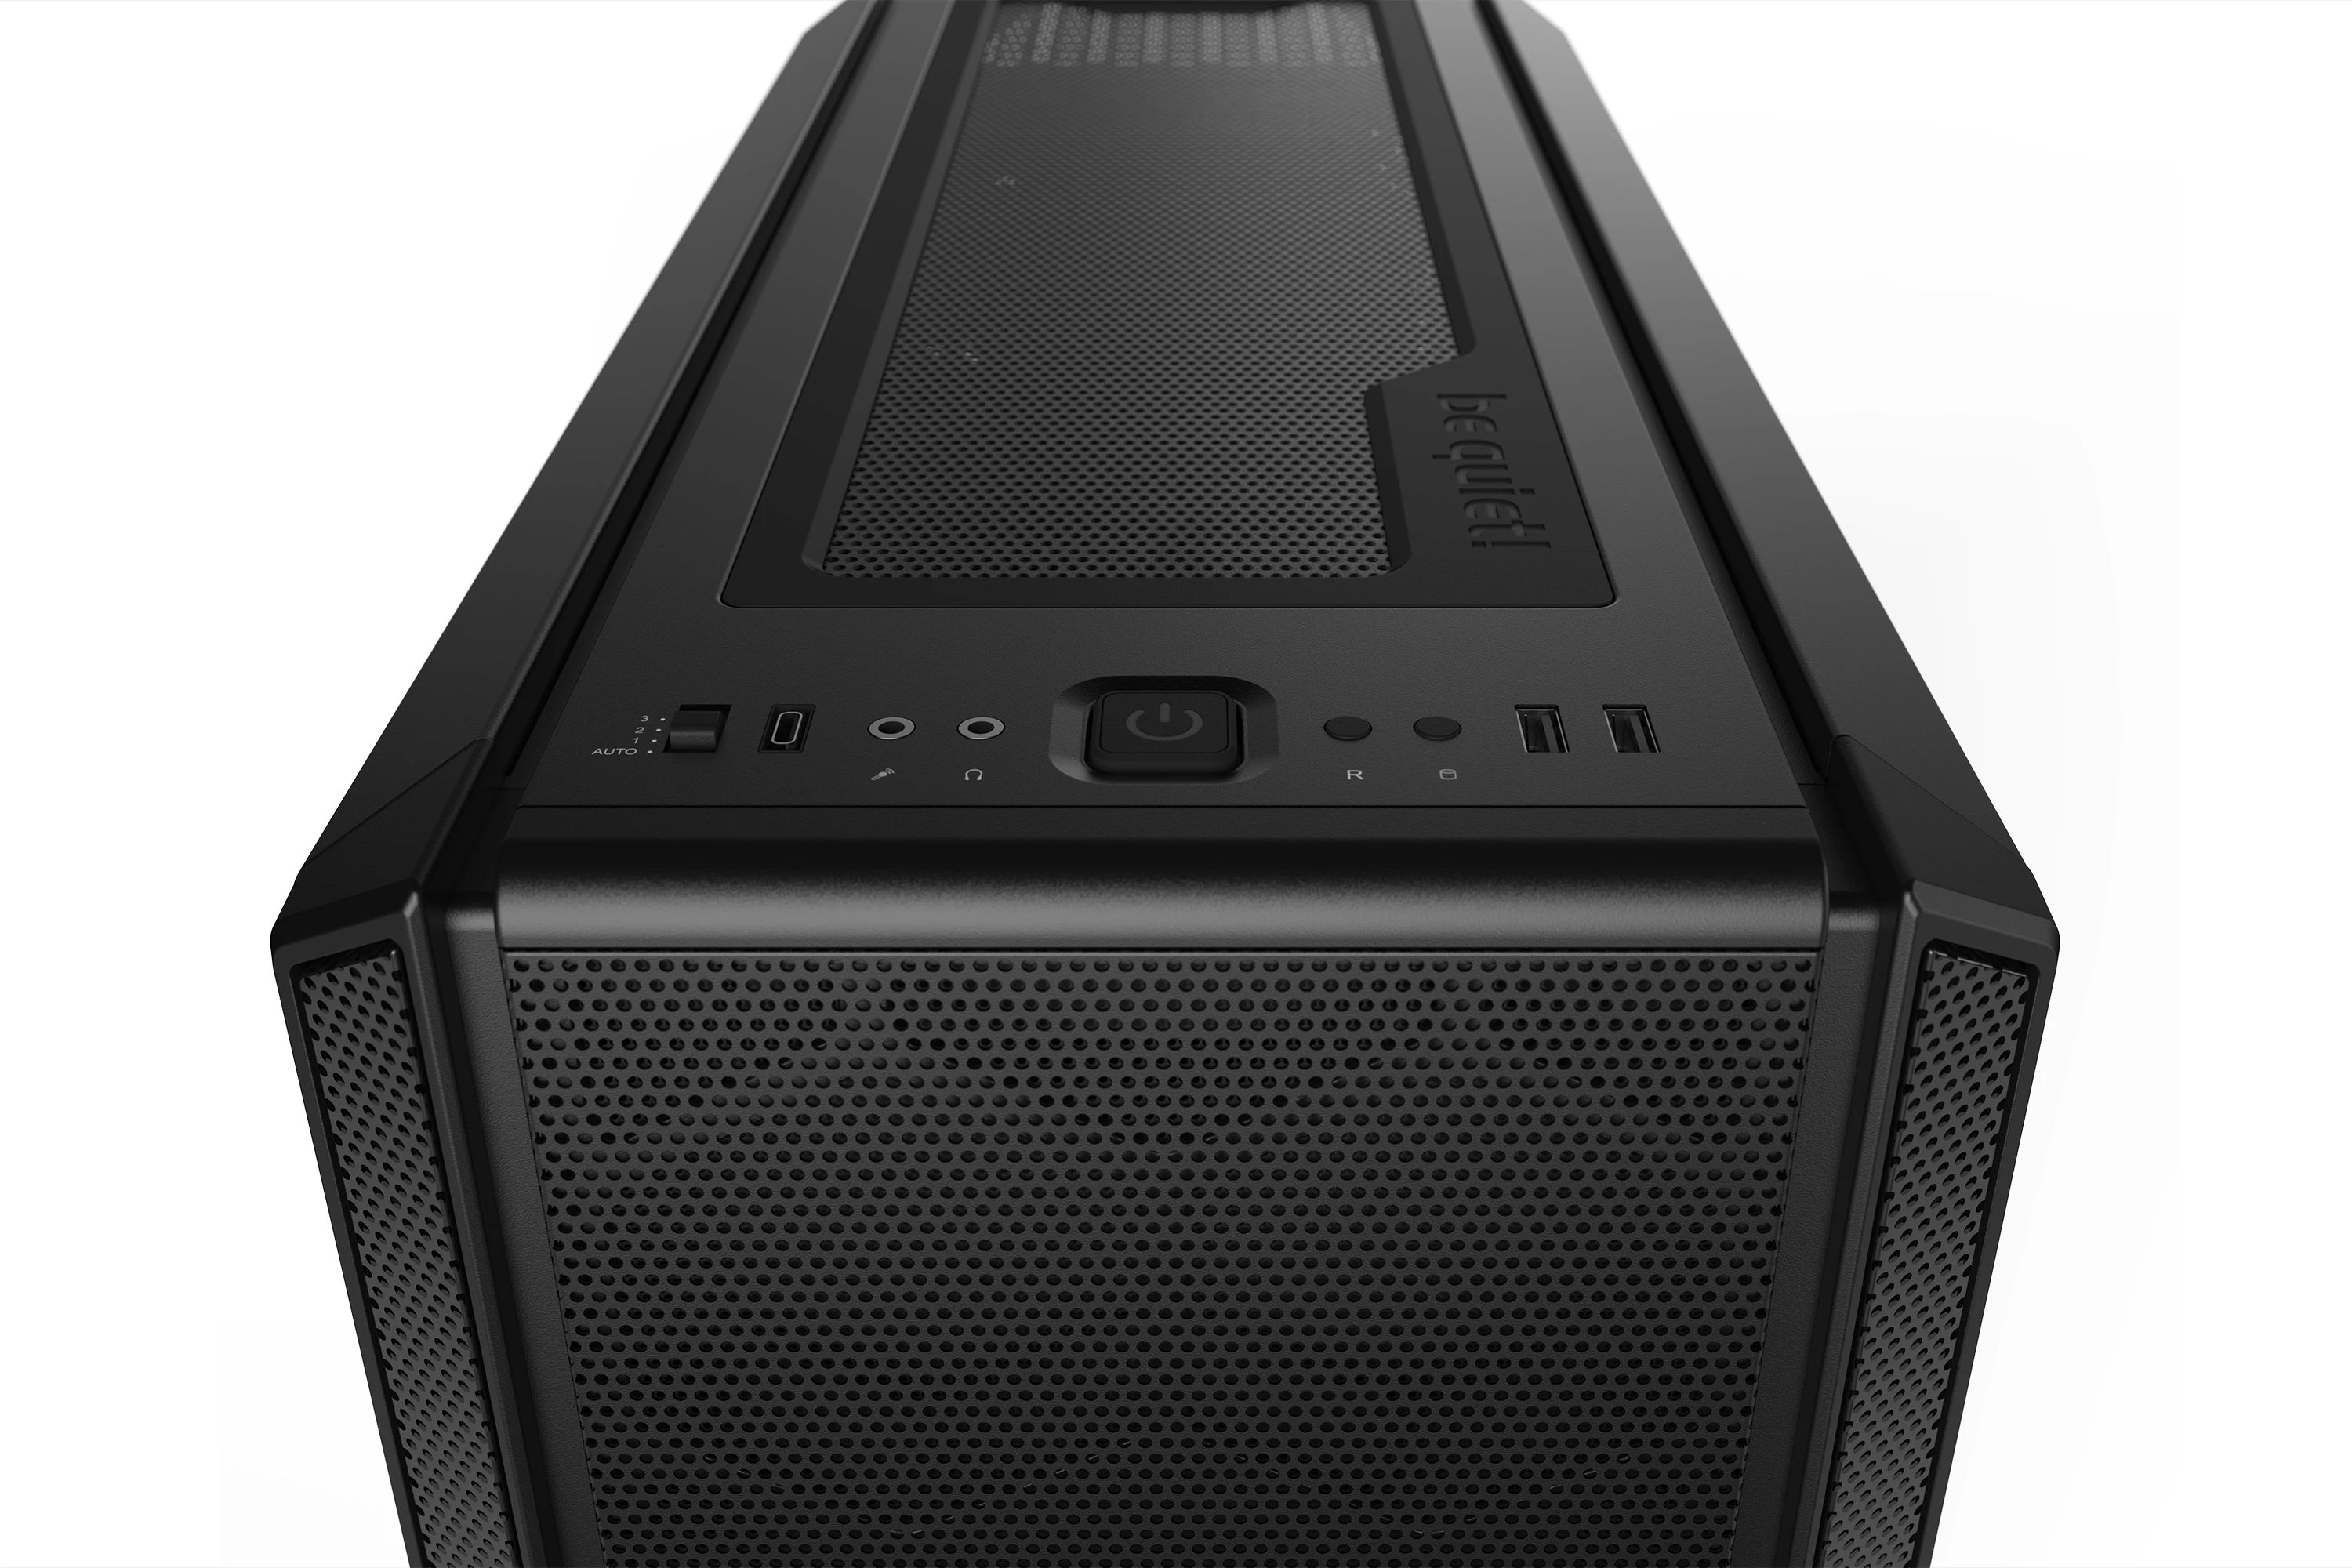 be quiet! SILENT BASE 802 Black, E-ATX/ATX/M-ATX/Mini-ITX, 3x Pure Wings 2 140mm, 4-step fan controller with PWM Hub, 2x USB 3.2 Gen. 1, 1x USB 3.2 Gen. 2 Type C, Mic + Audio, Interchangeable top cover and front panel, 3Y warranty - image 7